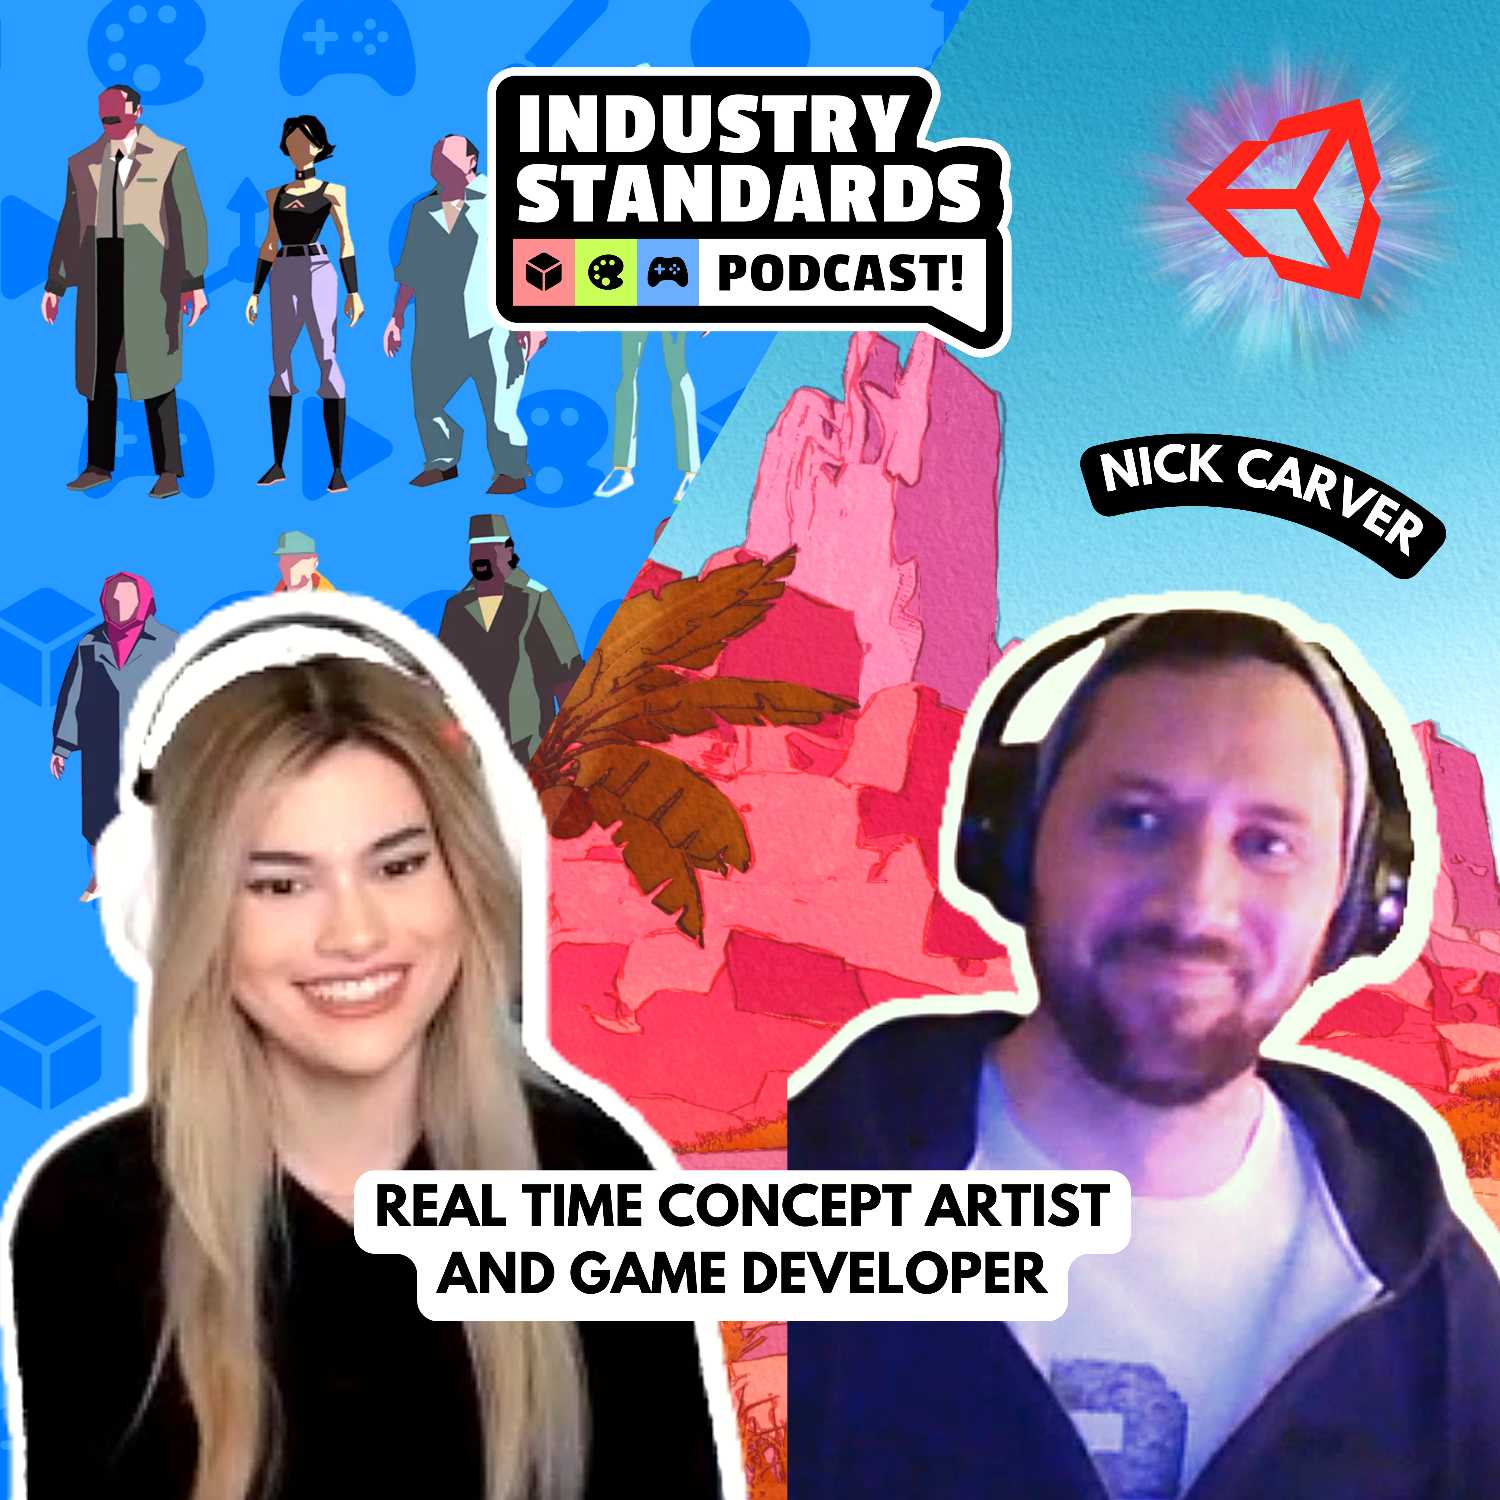 Thriving as a Versatile Artist by Creating Interactive Stylized 3D Scenes and Games in Unity - Nick Carver